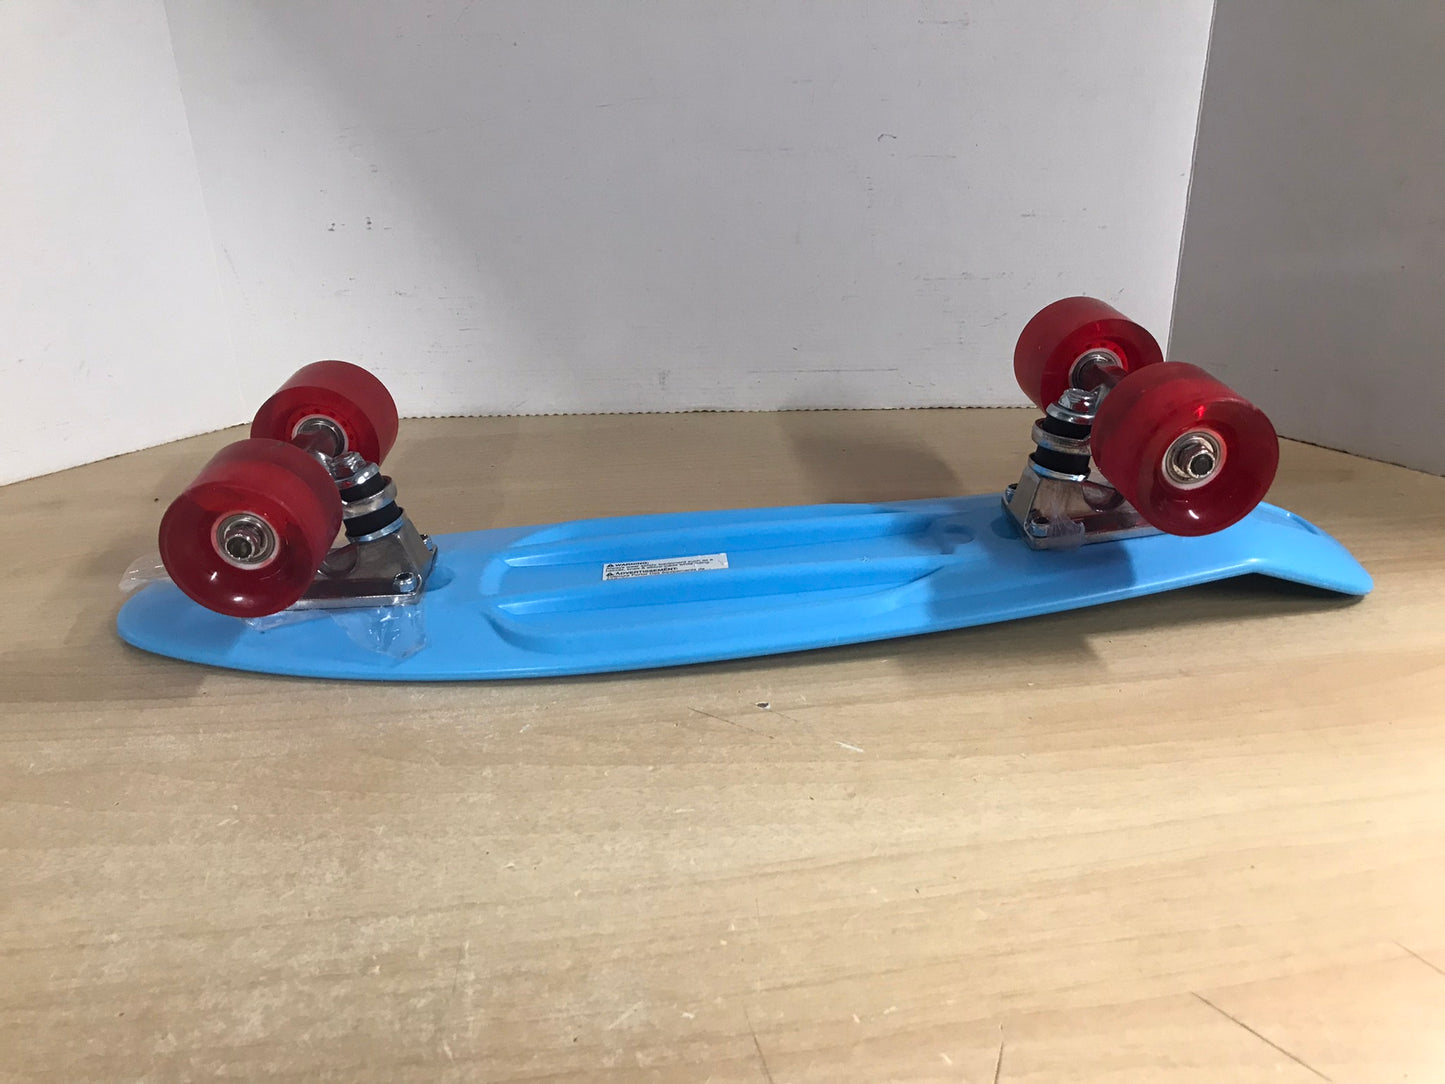 Skateboard Honeycomb Carver 17 inch New Blue With Red Rubber Wheels